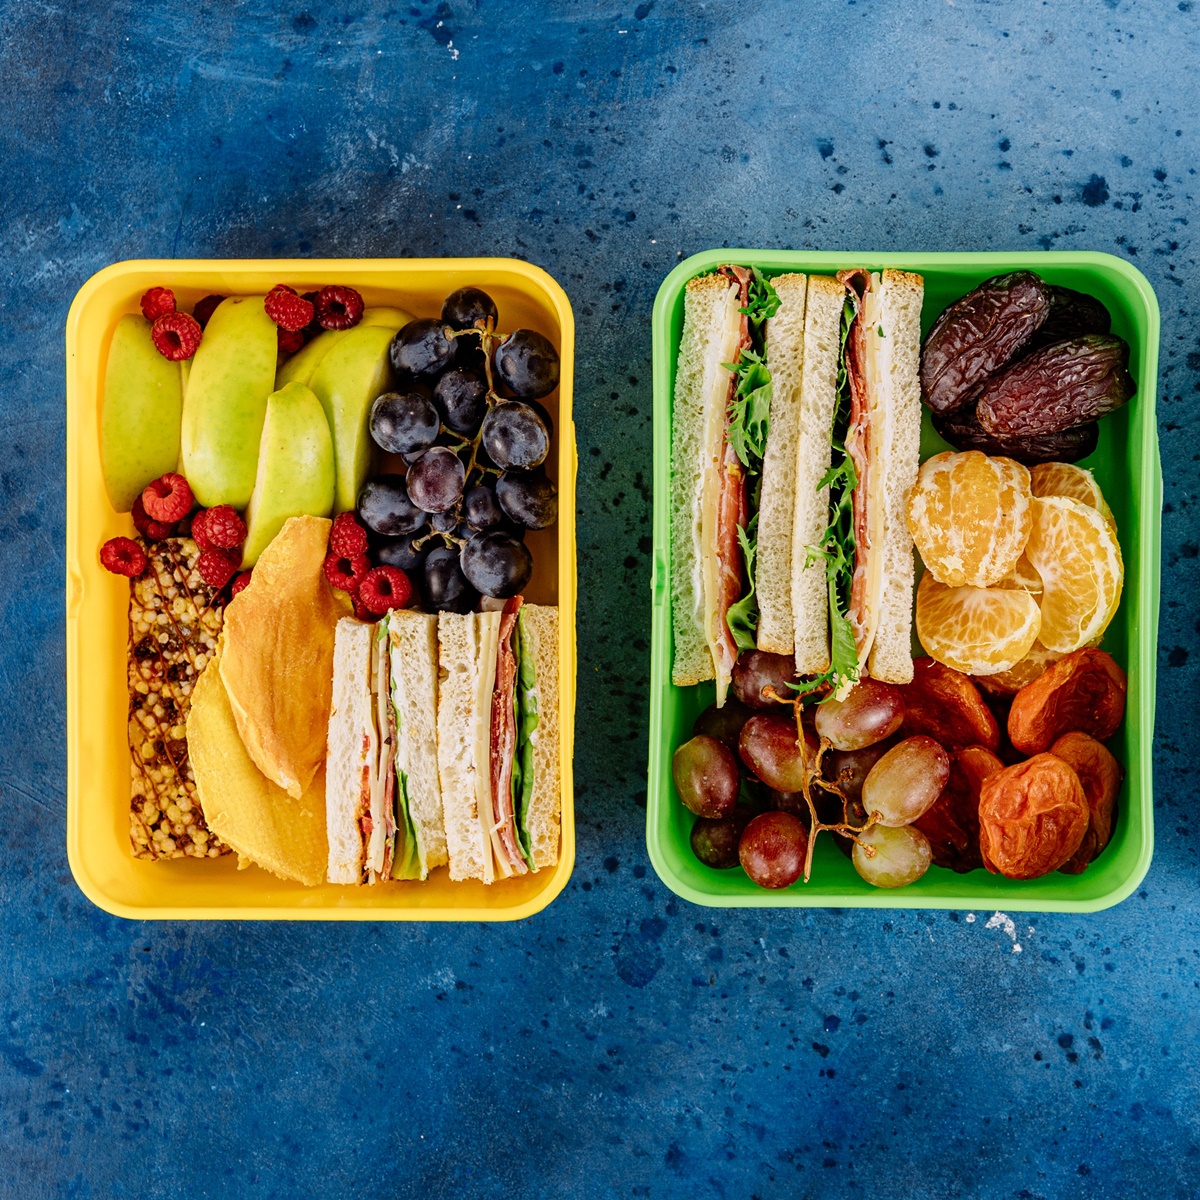 Bento Box Lunches: Explore simple recipes that meat lovers will adore taking to work